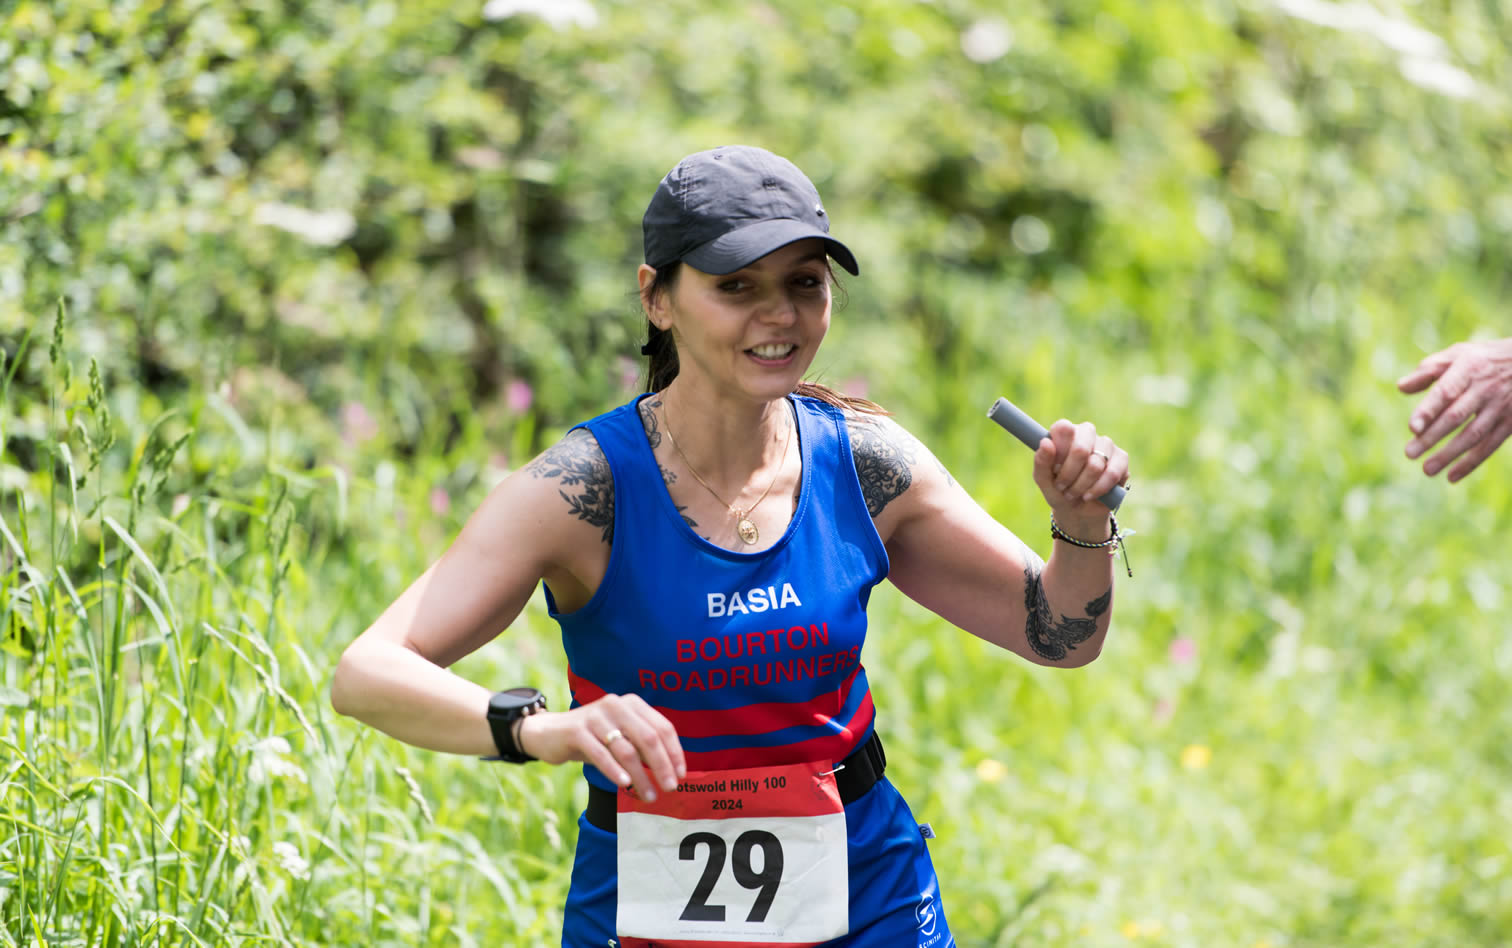 Basia takes the baton at mile 80 hand-over of the Cotswold Hilly 100 Relay - 26-05-2024